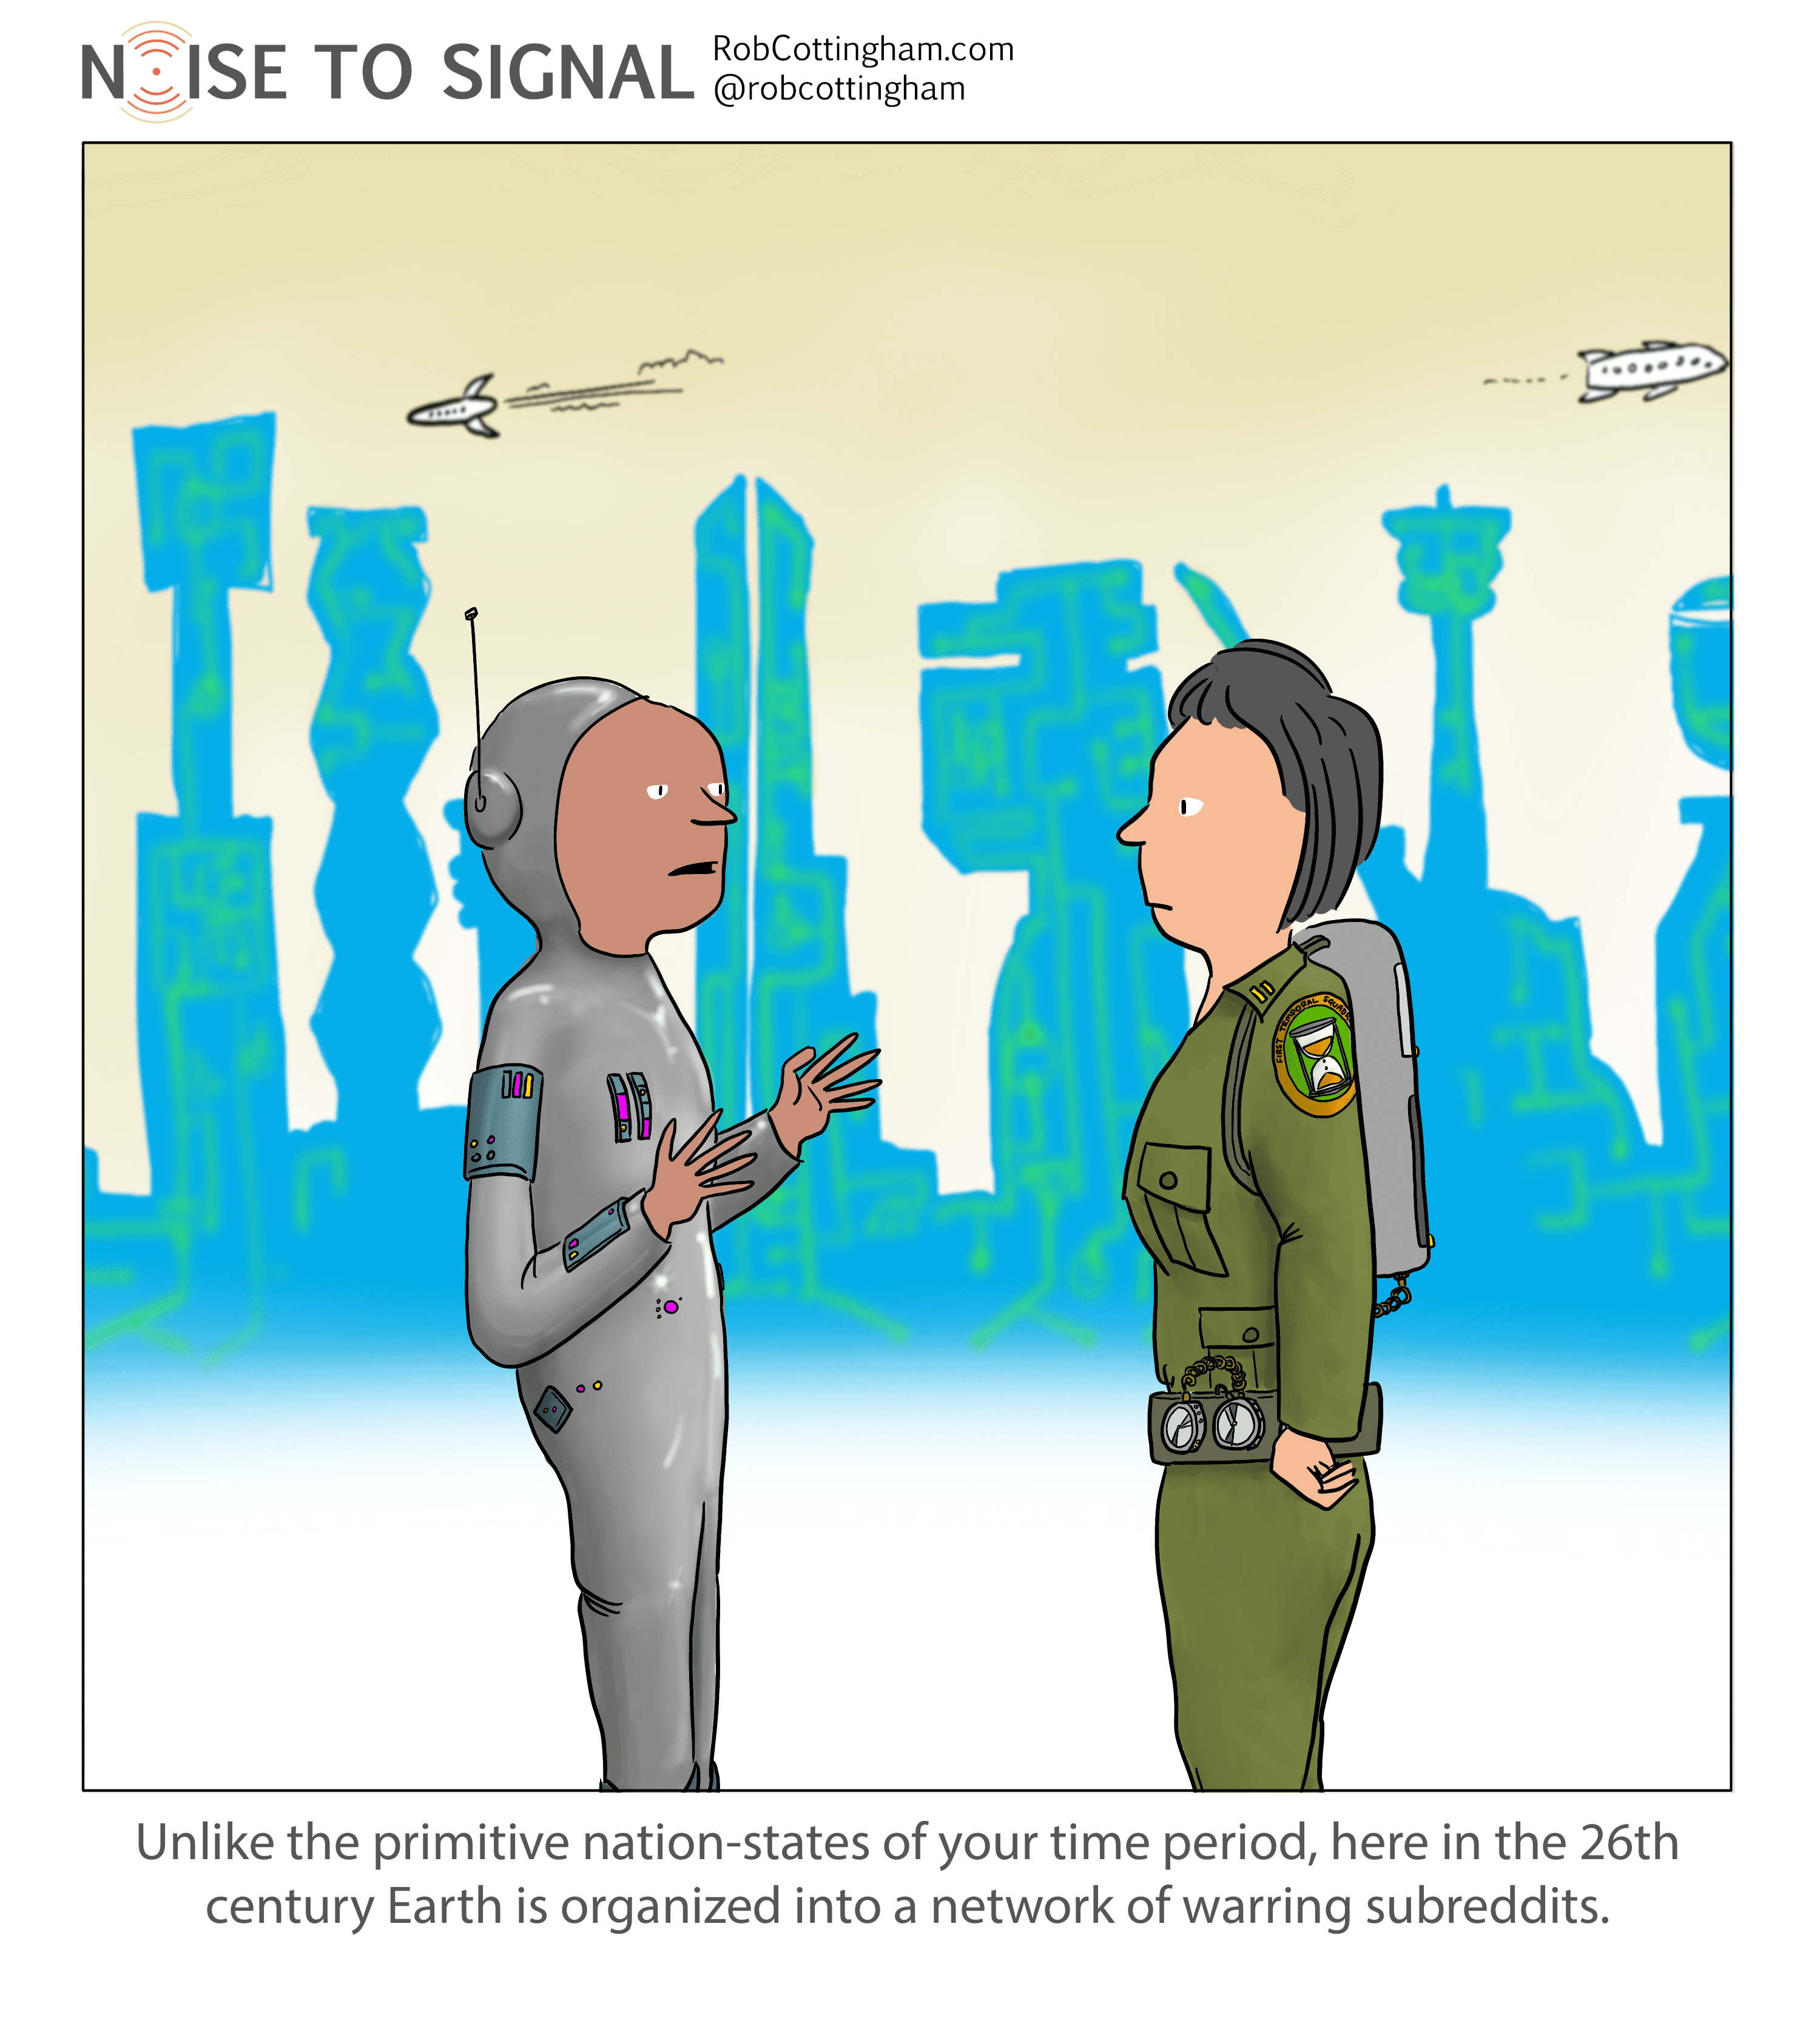 (futuristic person talking to a time traveler) Unlike the primitive nation-states of your time period, here in the 26th century Earth is organized into a network of warring subreddits.